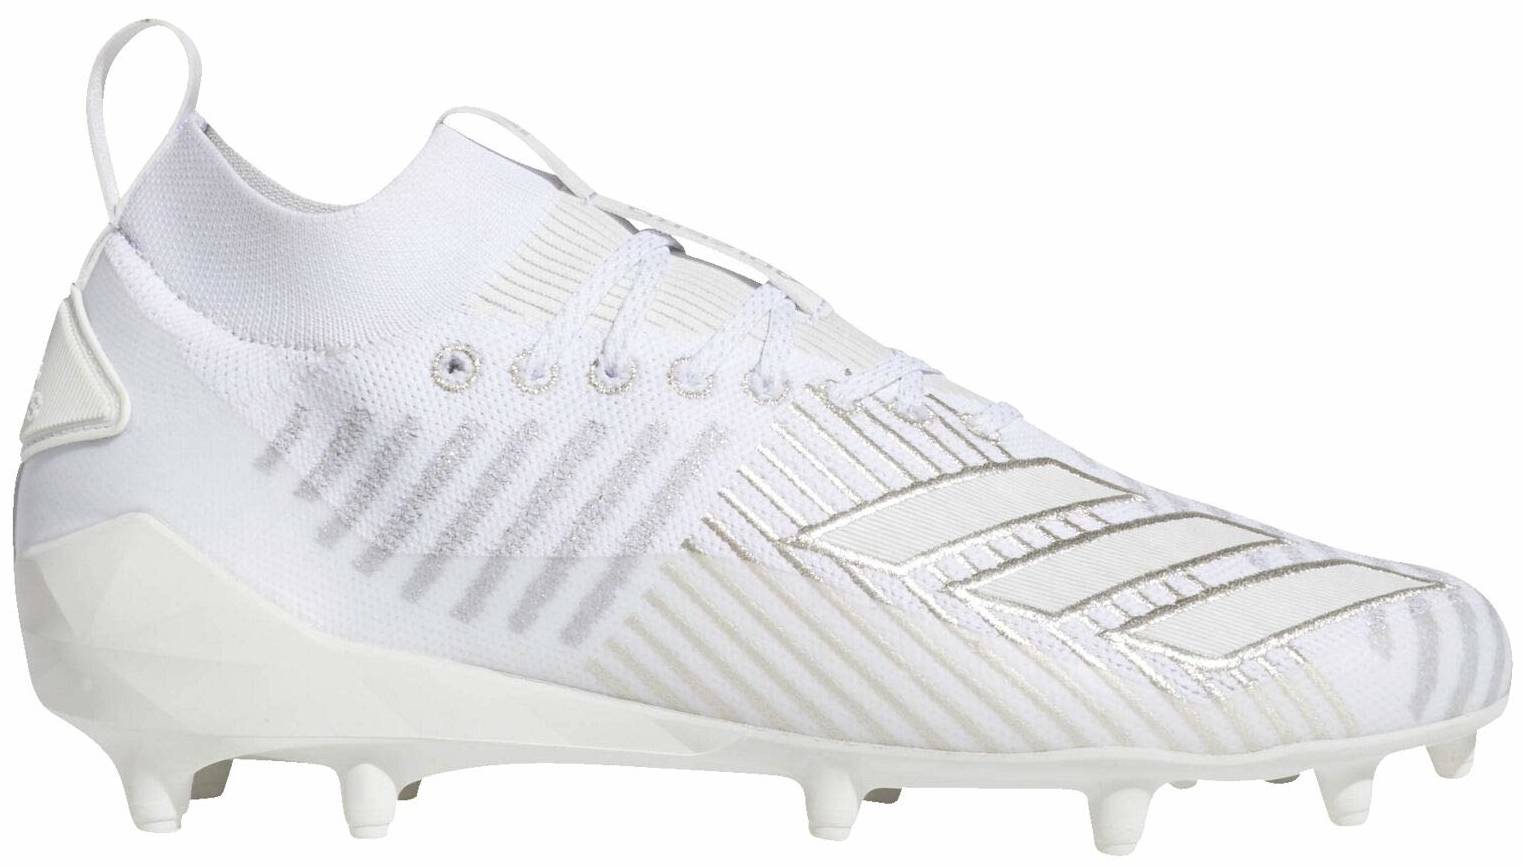 Save 61% on White Football Cleats (21 